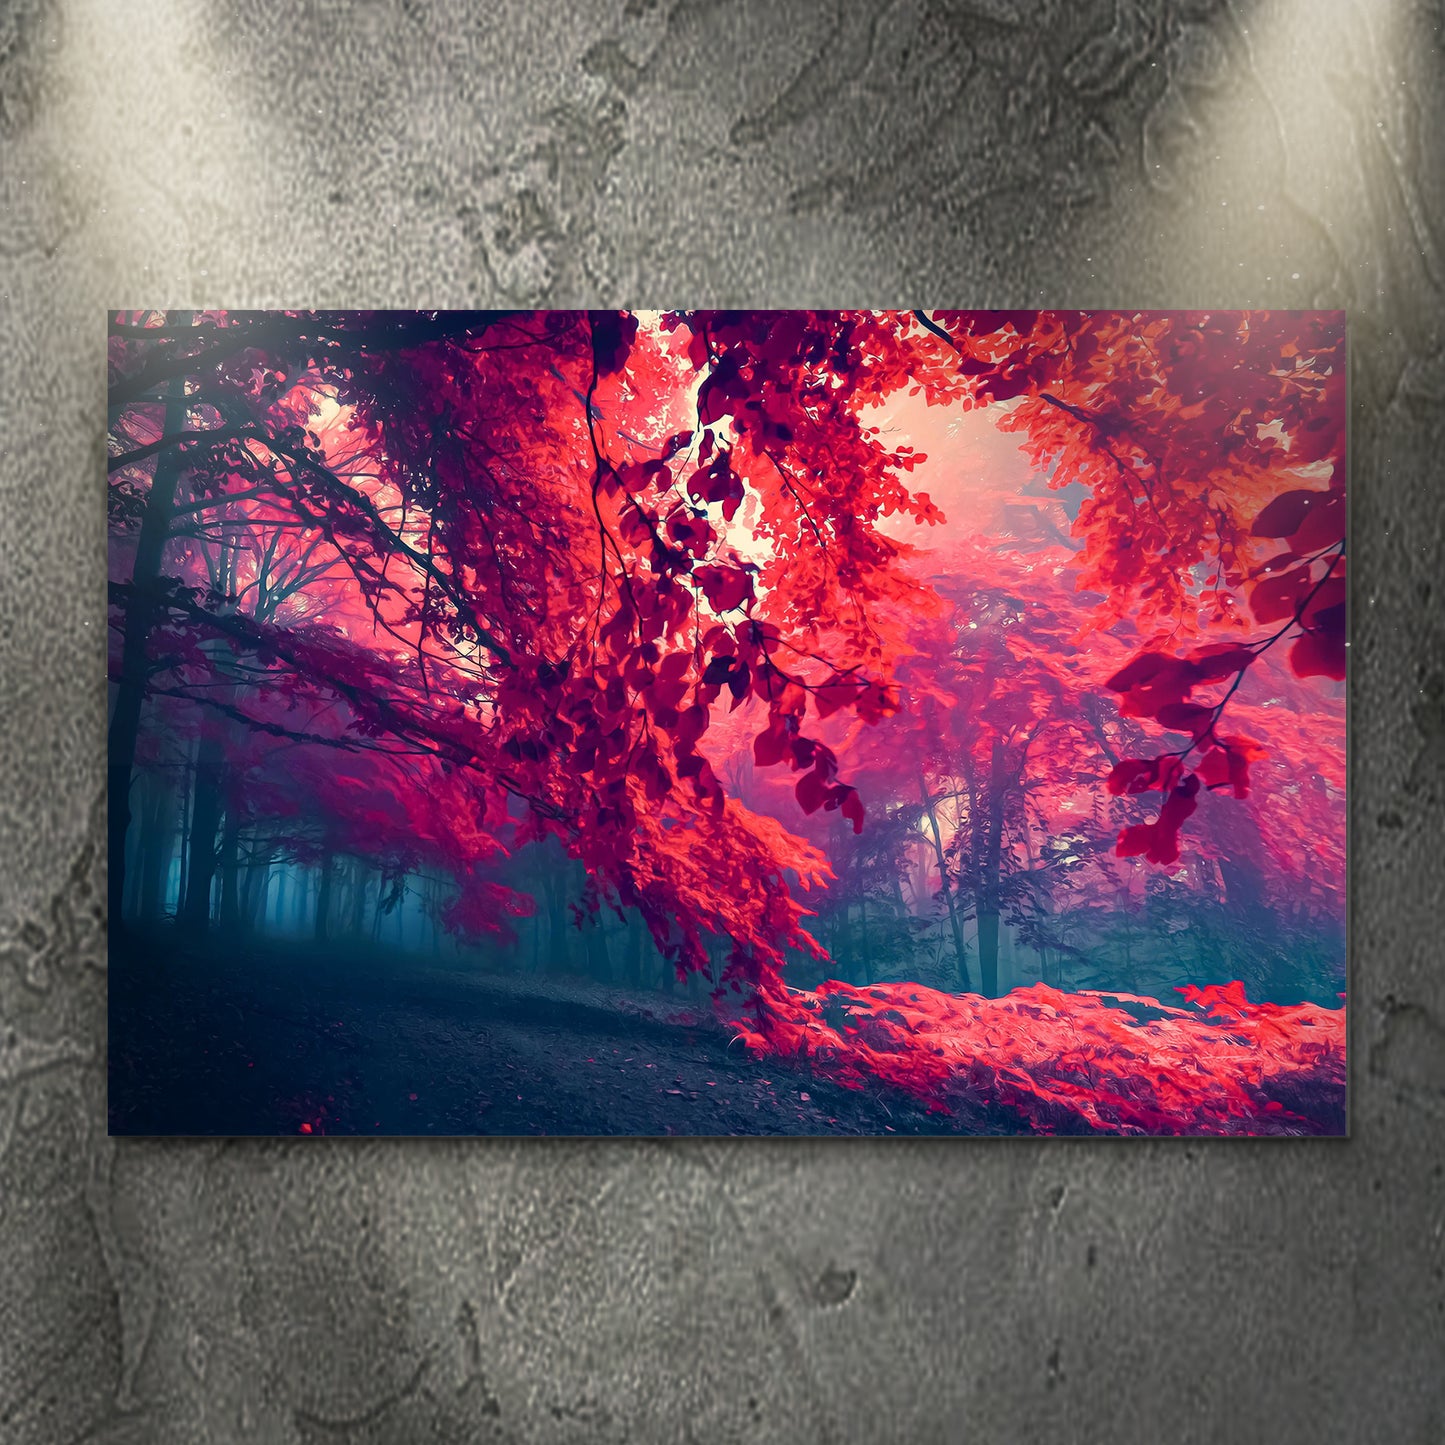 Foggy Red Maple Tree Canvas Wall Art - Image by Tailored Canvases